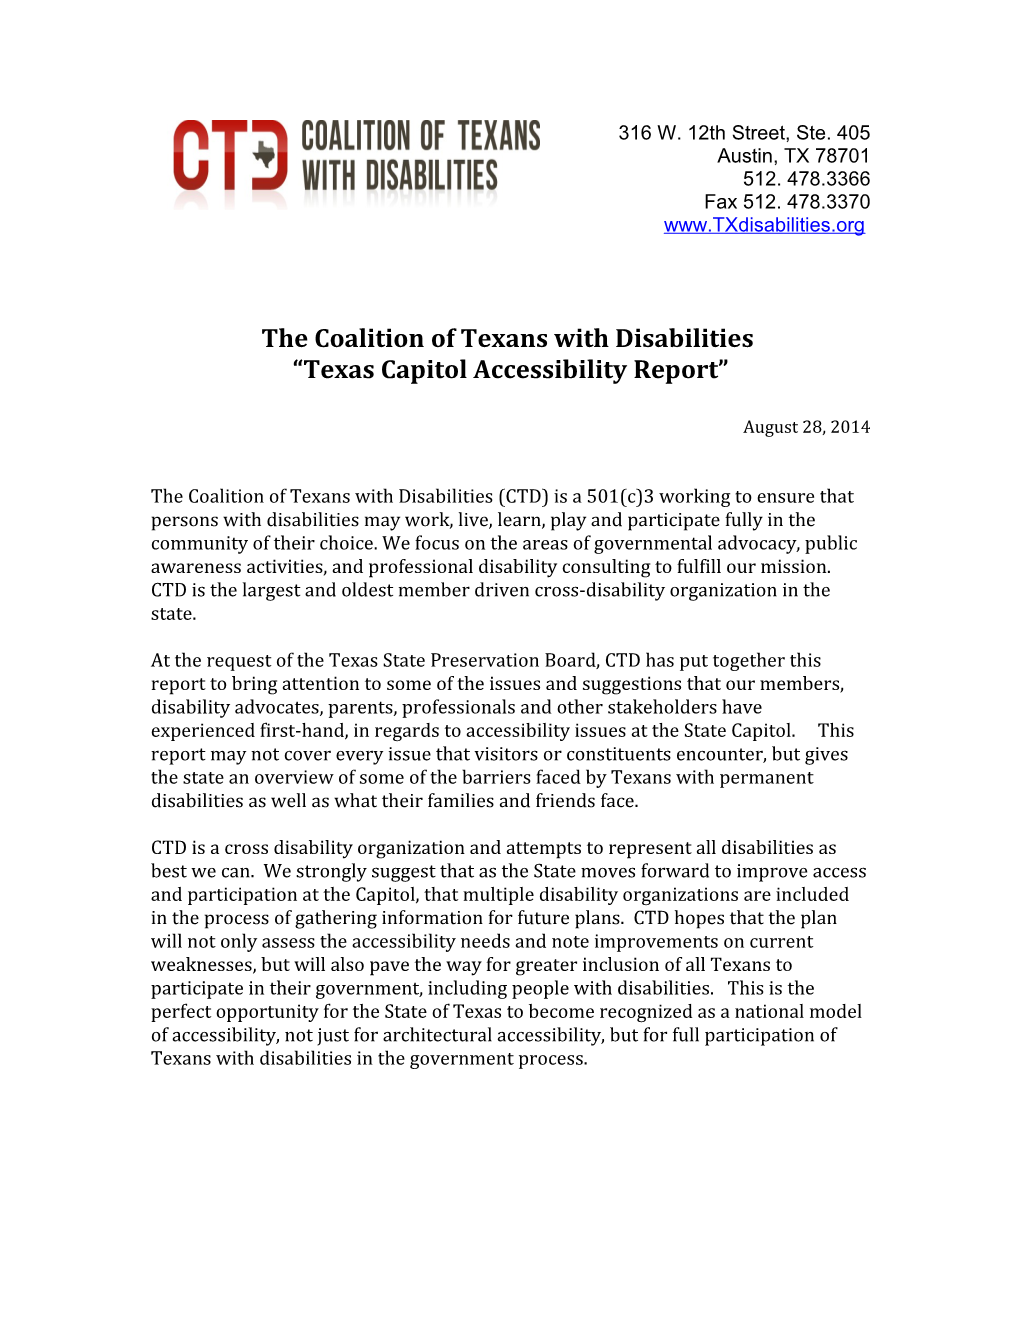 The Coalition of Texans with Disabilities